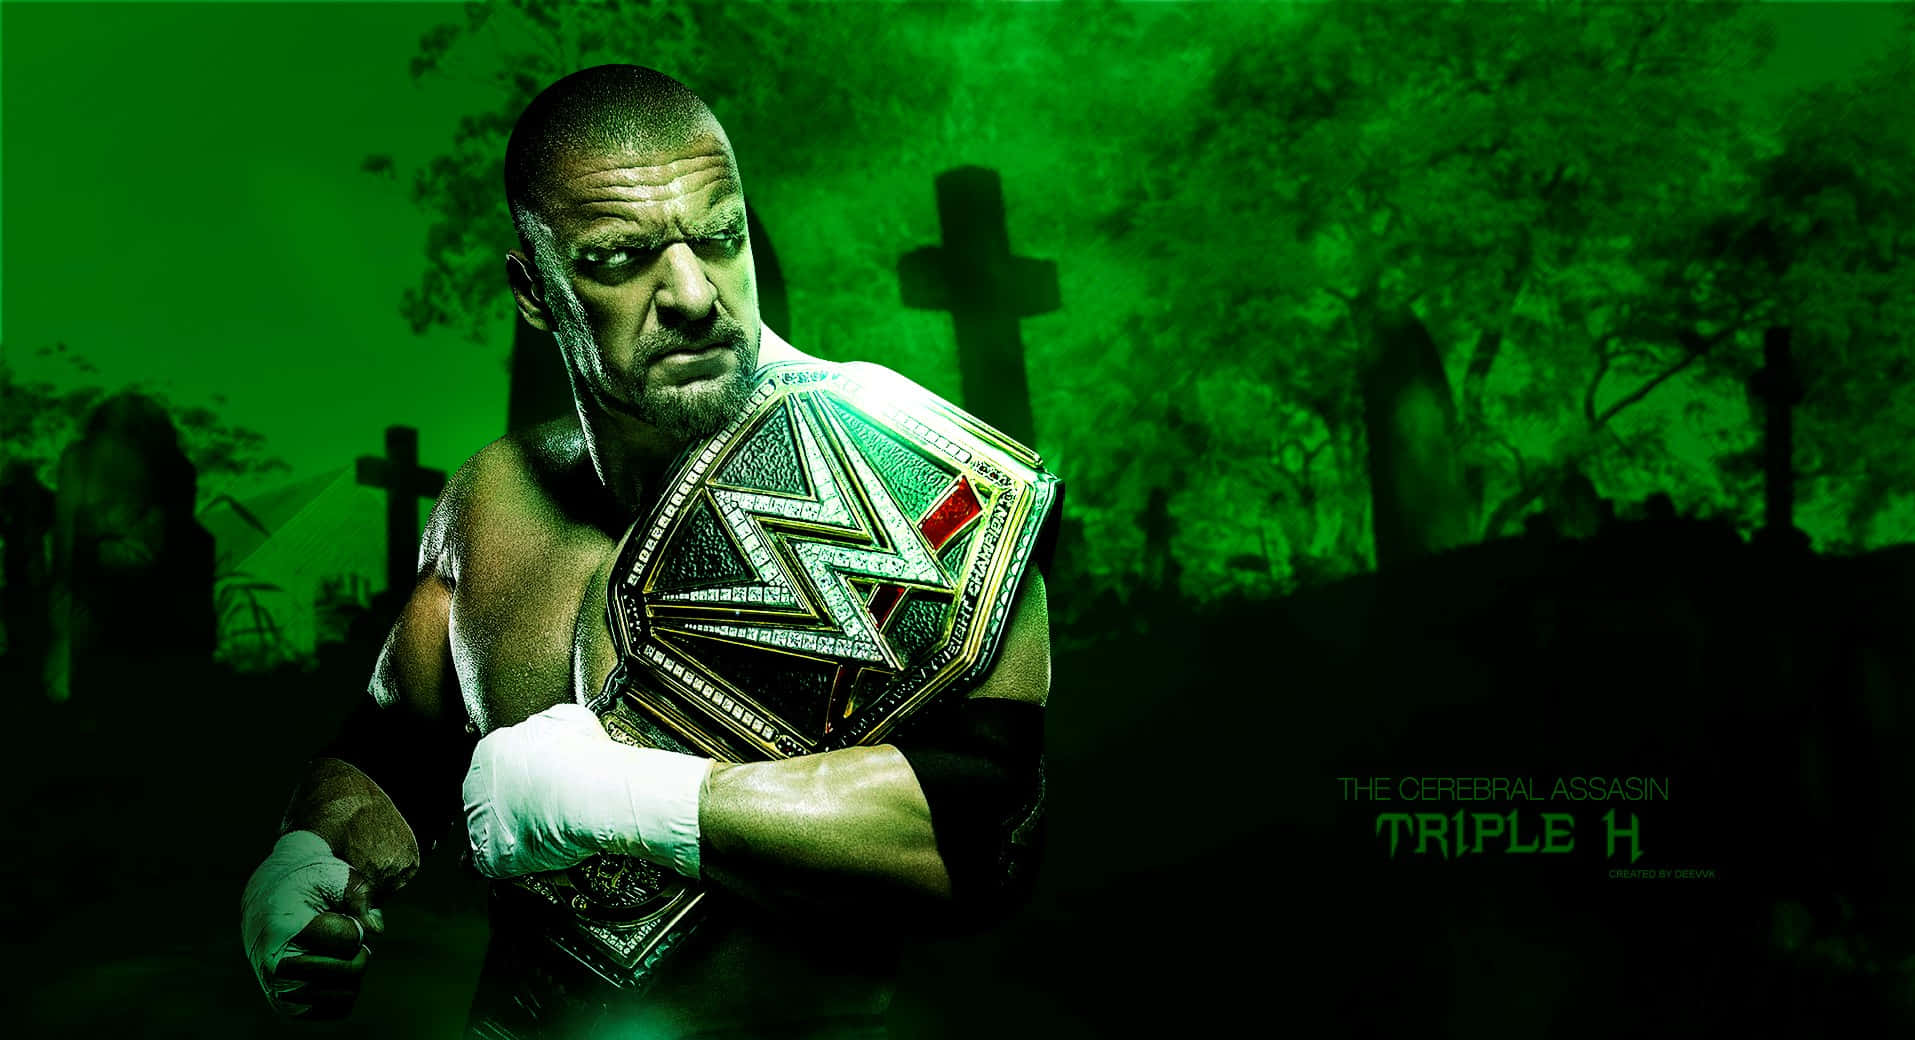 Triple H On Green Cemetery Graphic